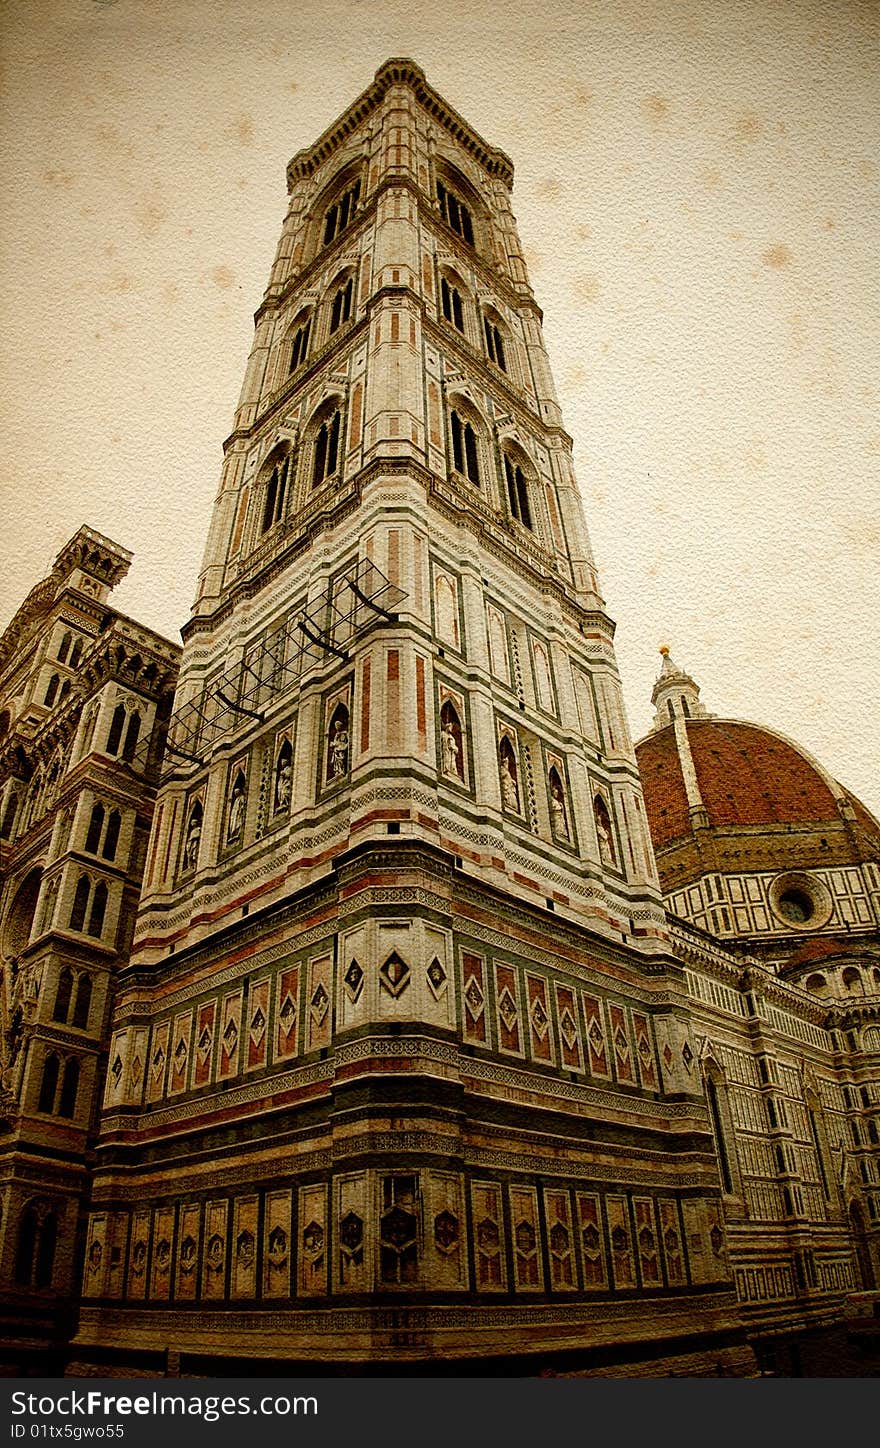 The Campanile built from Giotto.